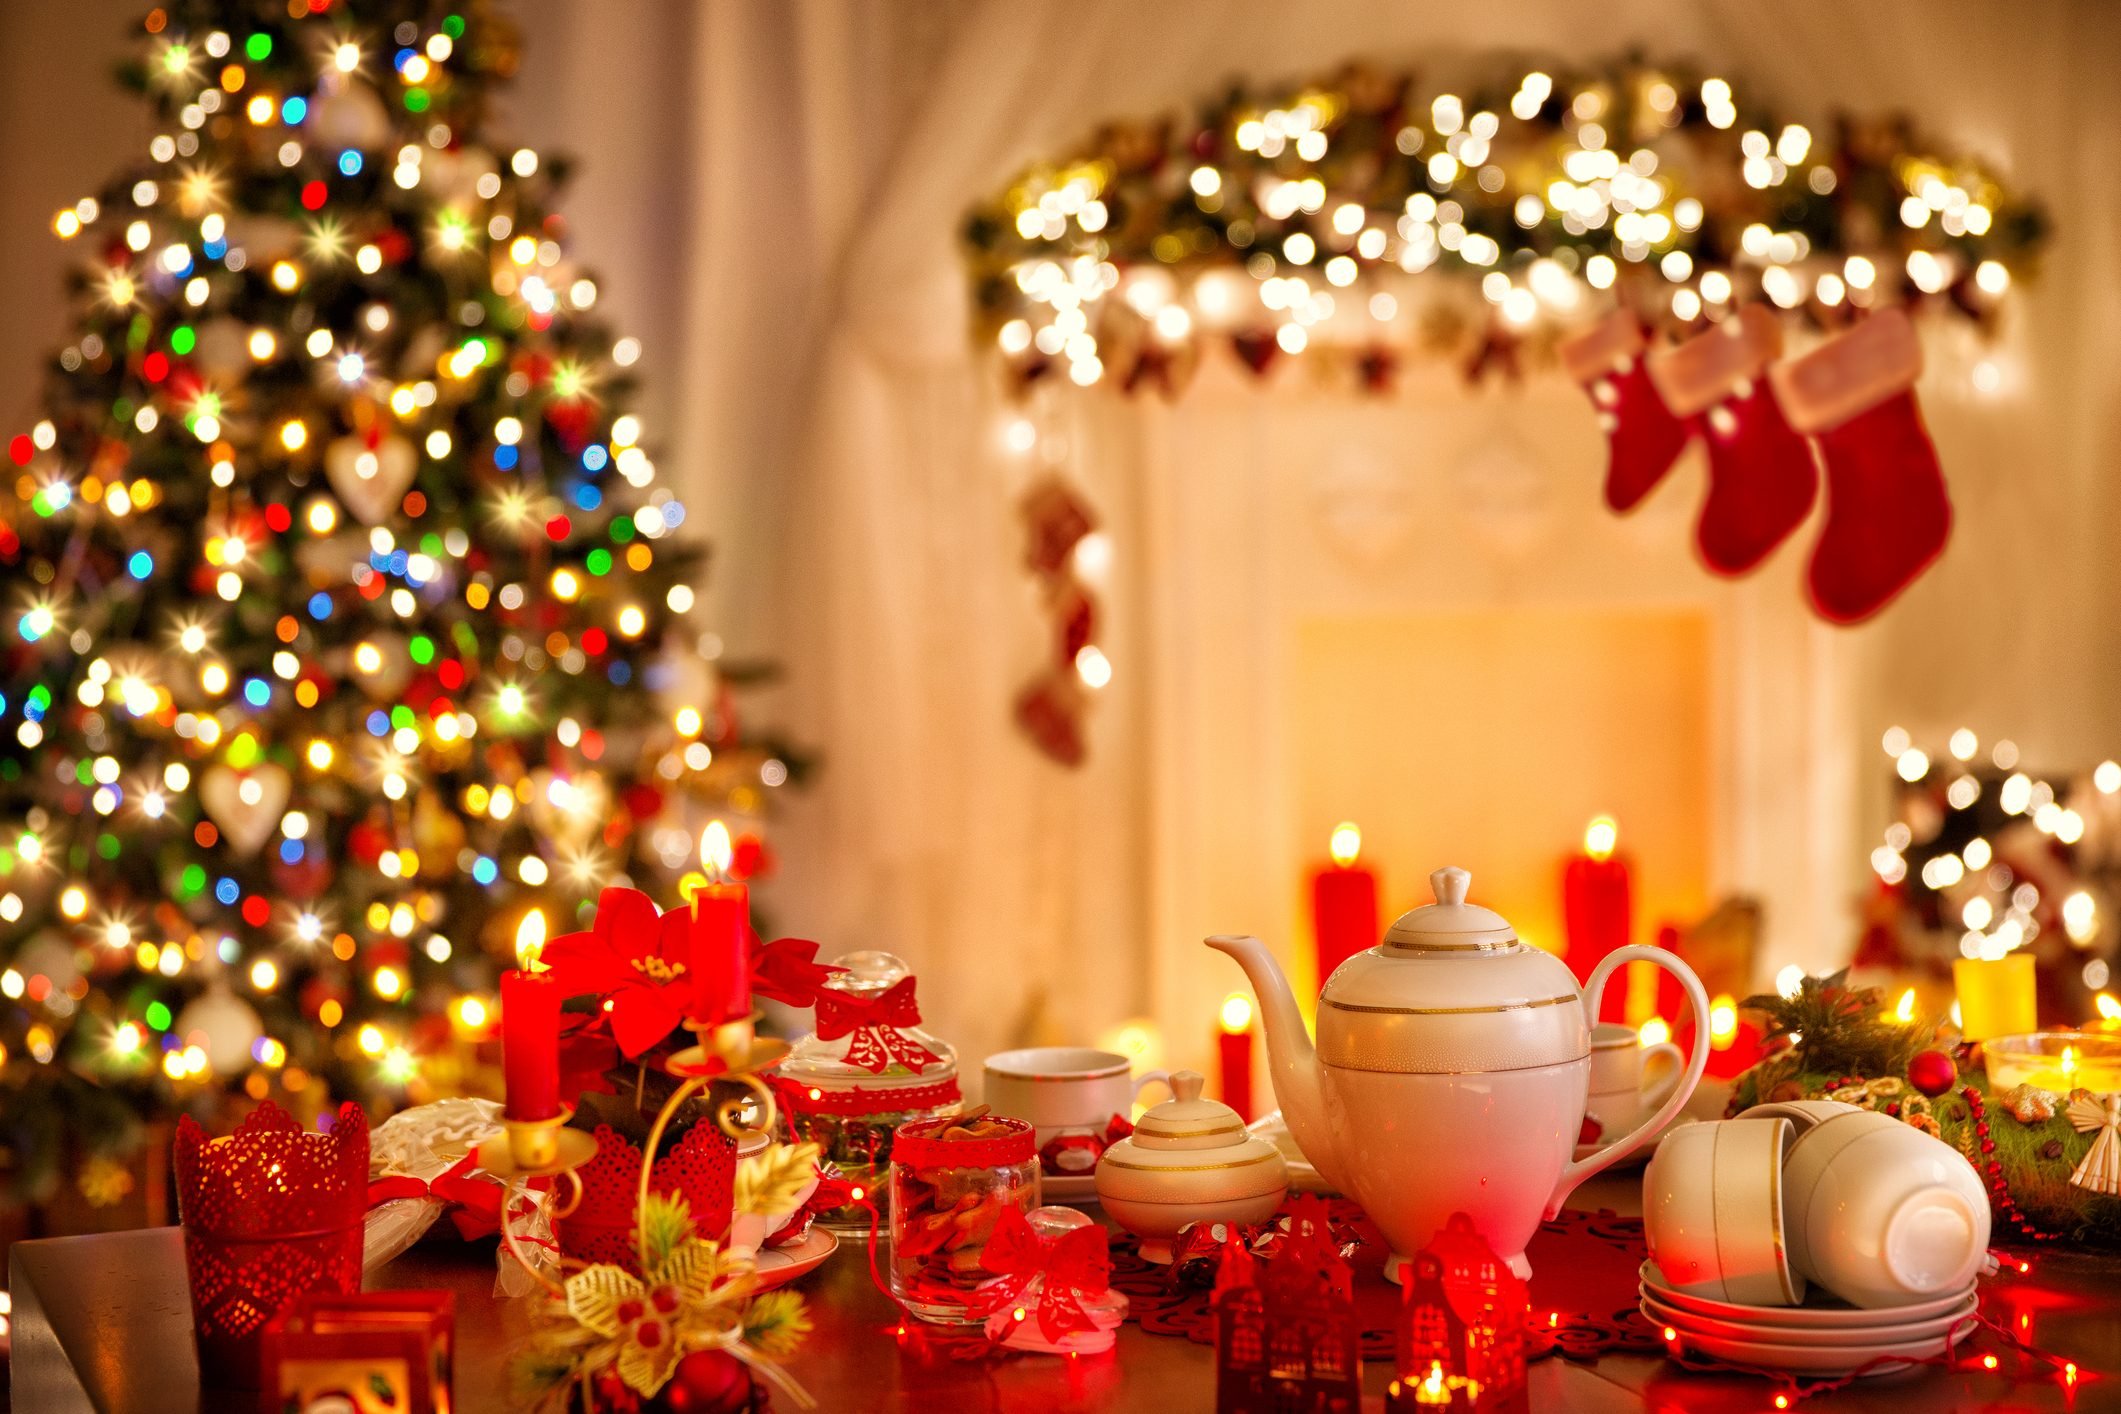 Fun Christmas Party Themes You Haven't Thought Of Reader's Digest